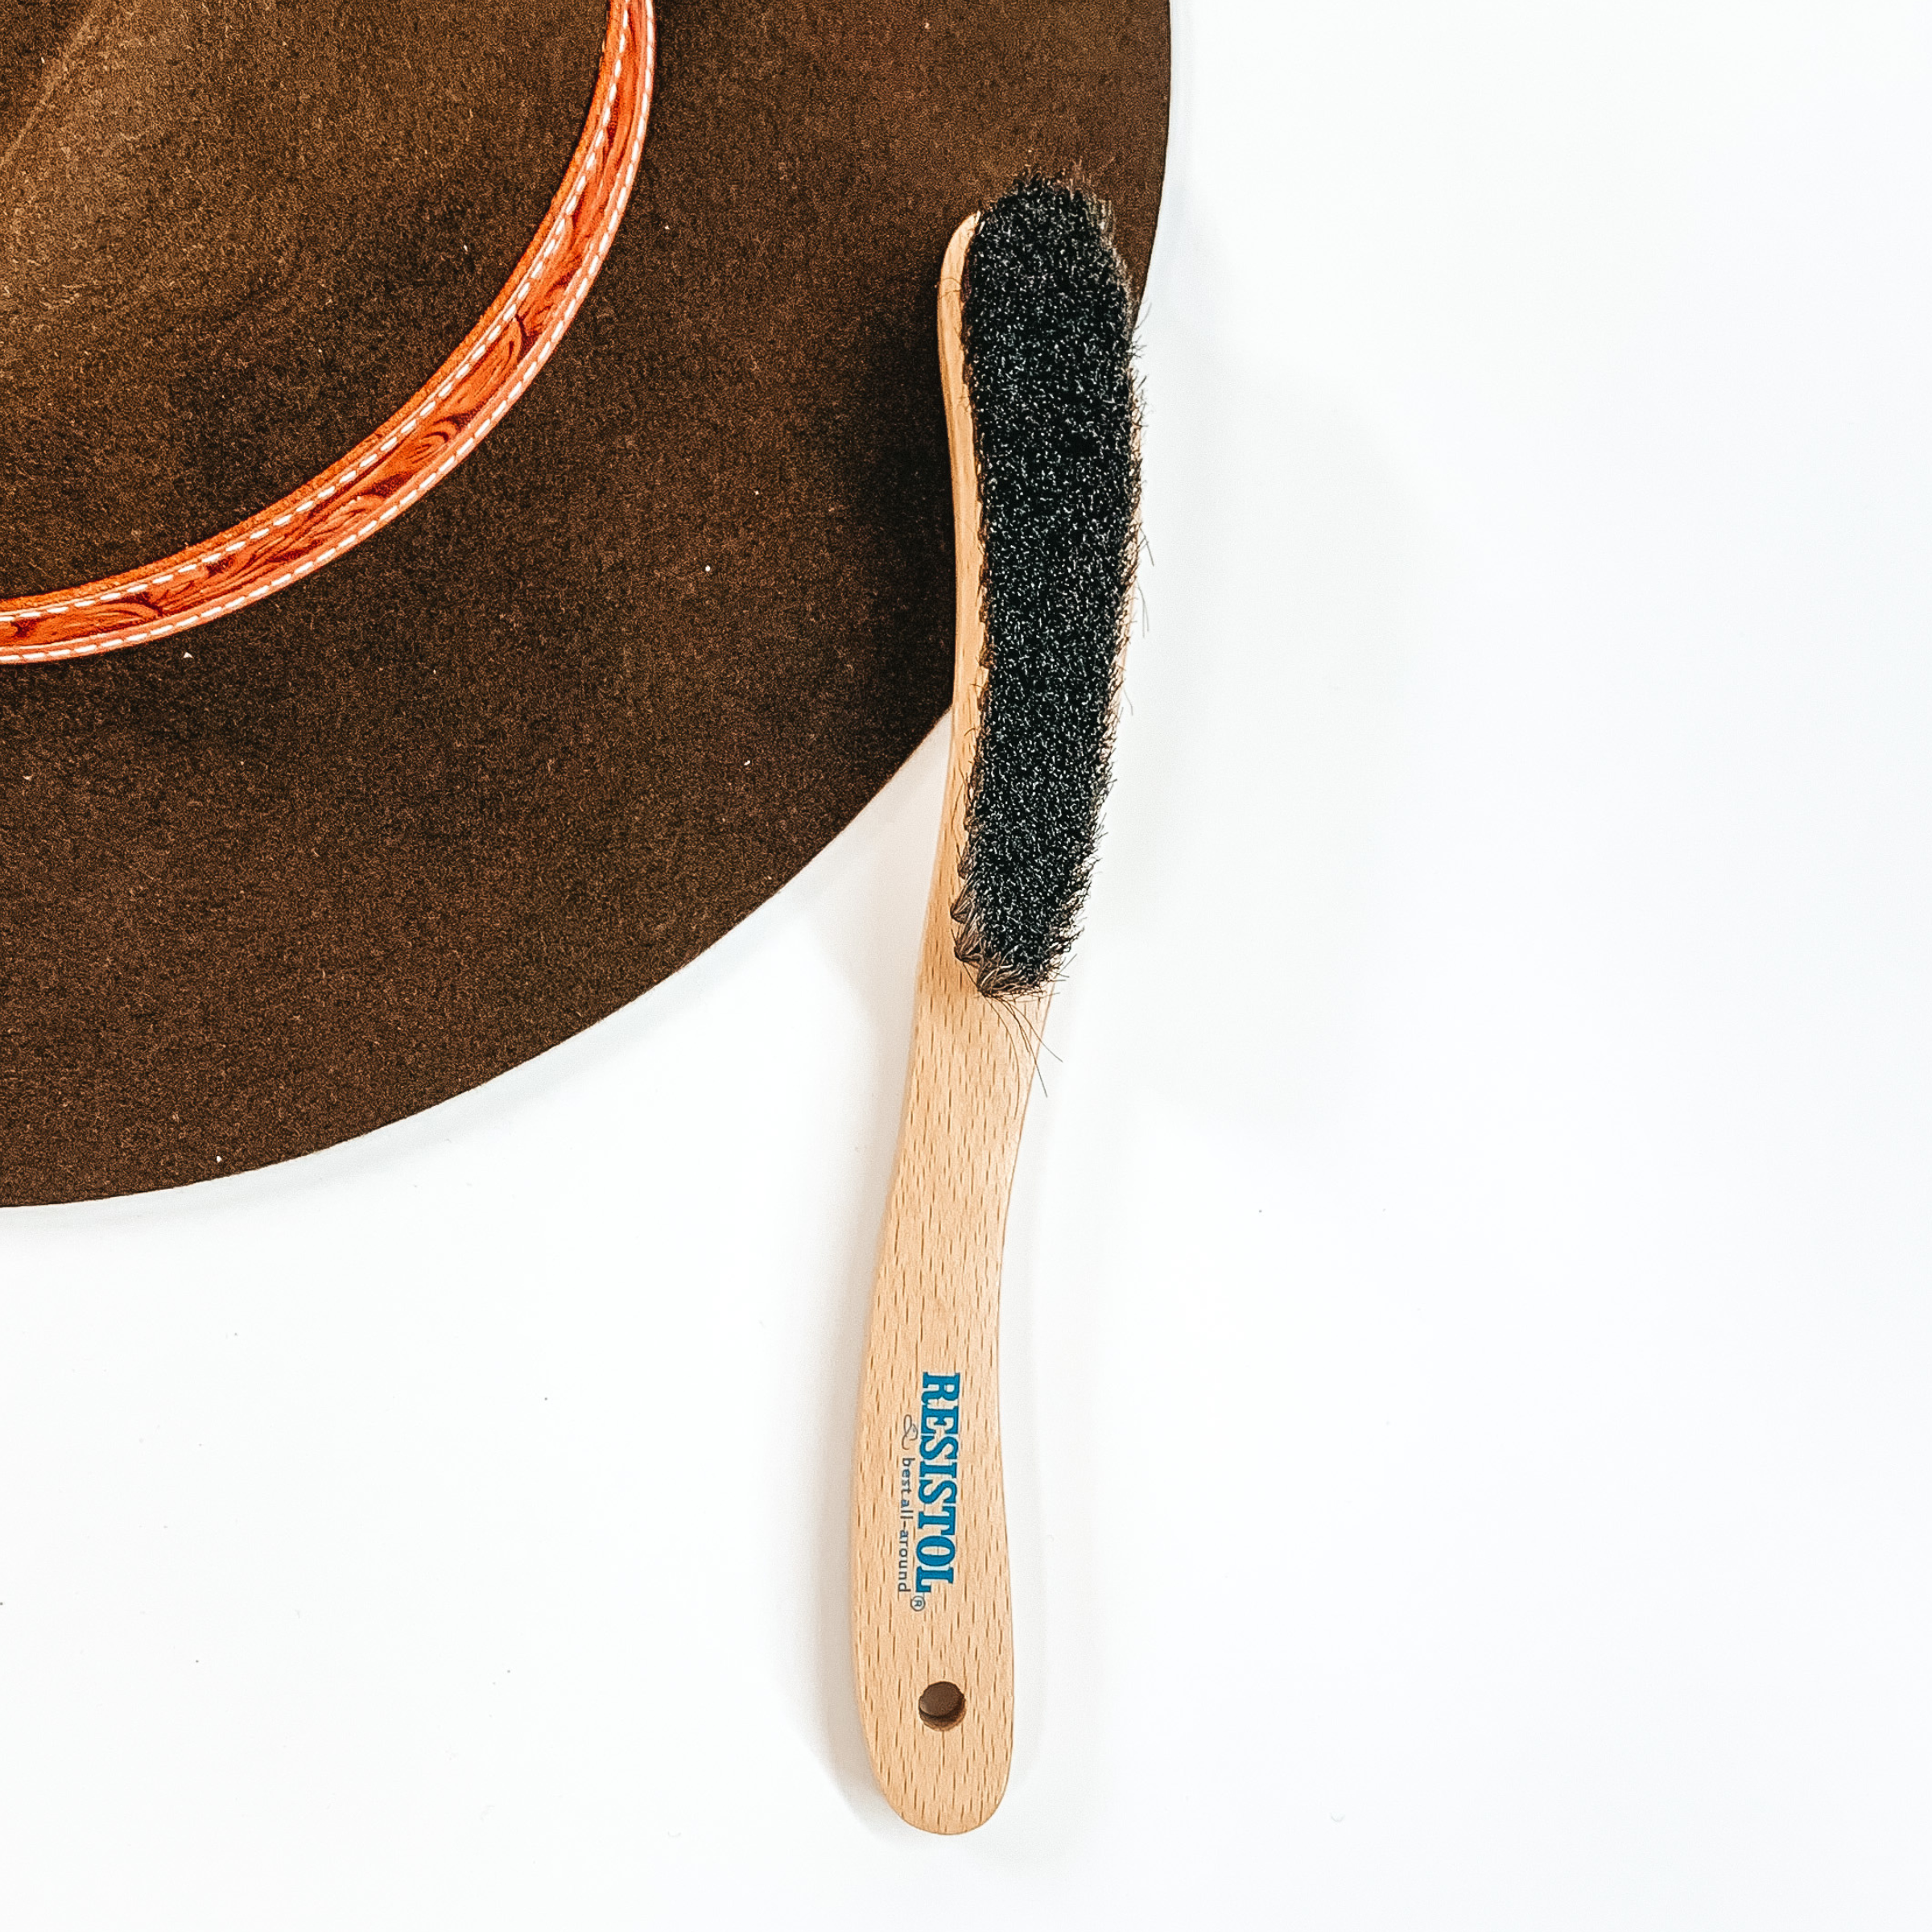 Thin wooden brush with brown bristles. This brush is pictured laying partially on a brown hat on a white background. 